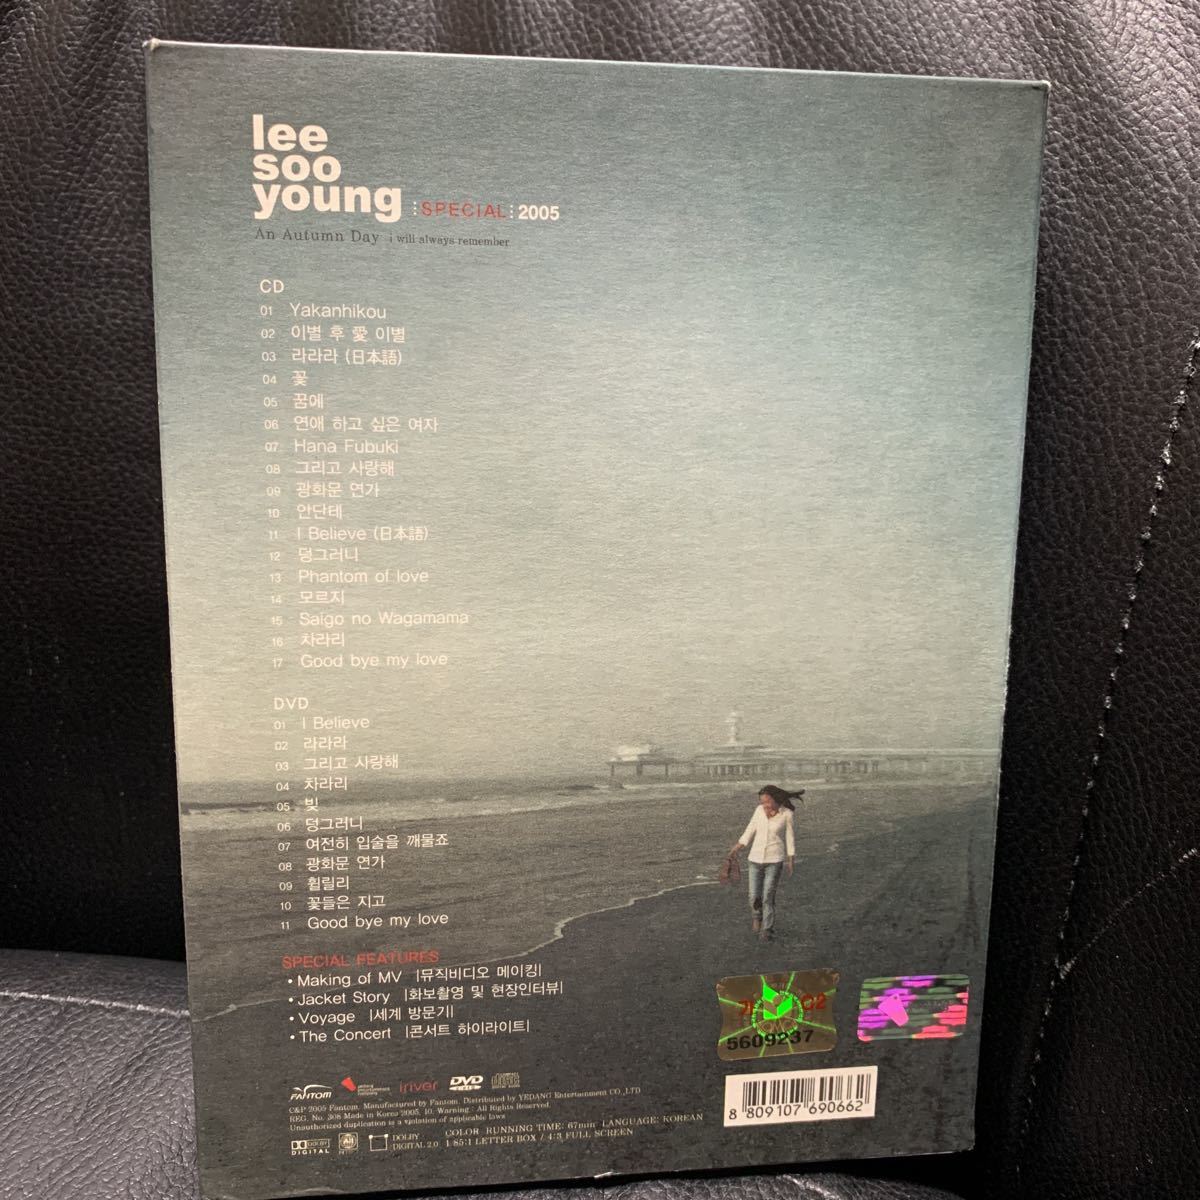 Lee Soo Young Special - 2005 An Autumn Day I will always remember (韓国盤) [CD+DVD]イ・スンヨン_画像2